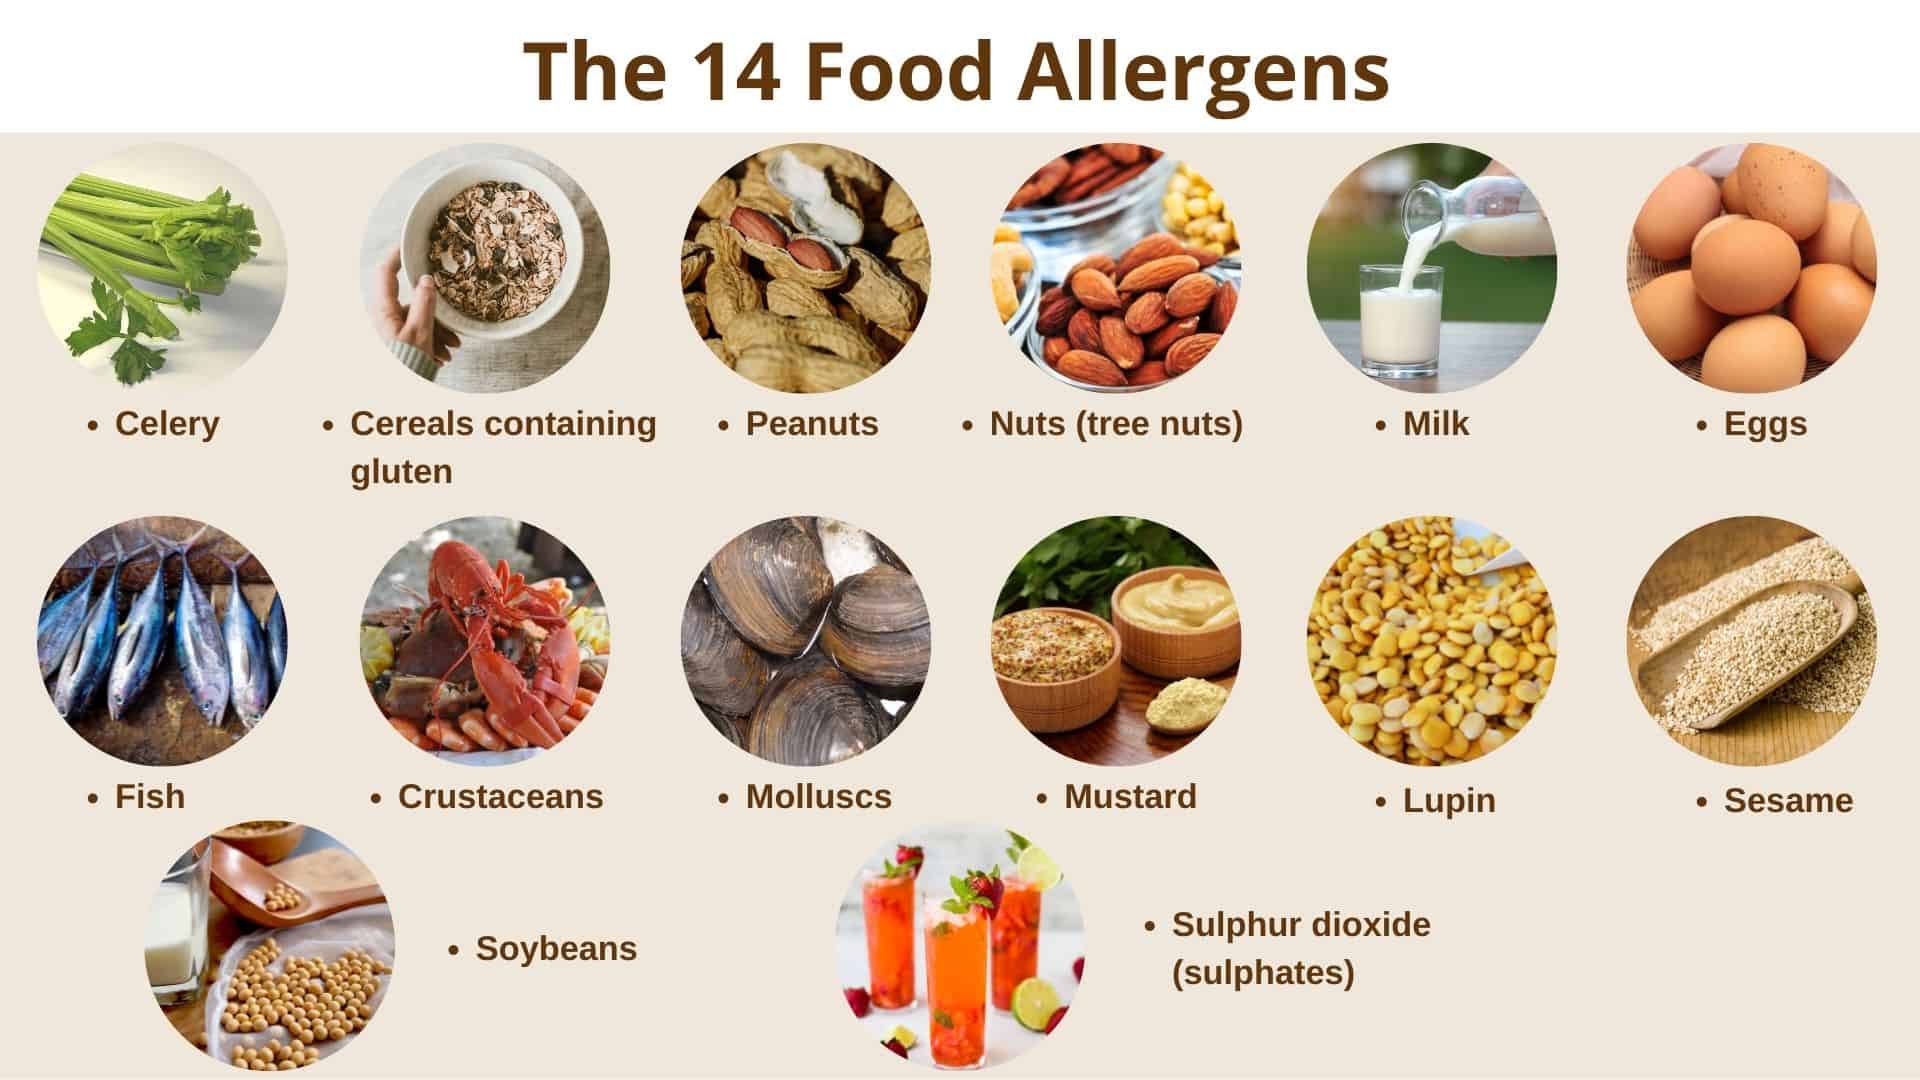 new-codex-code-of-practice-on-food-allergen-management-an-overview